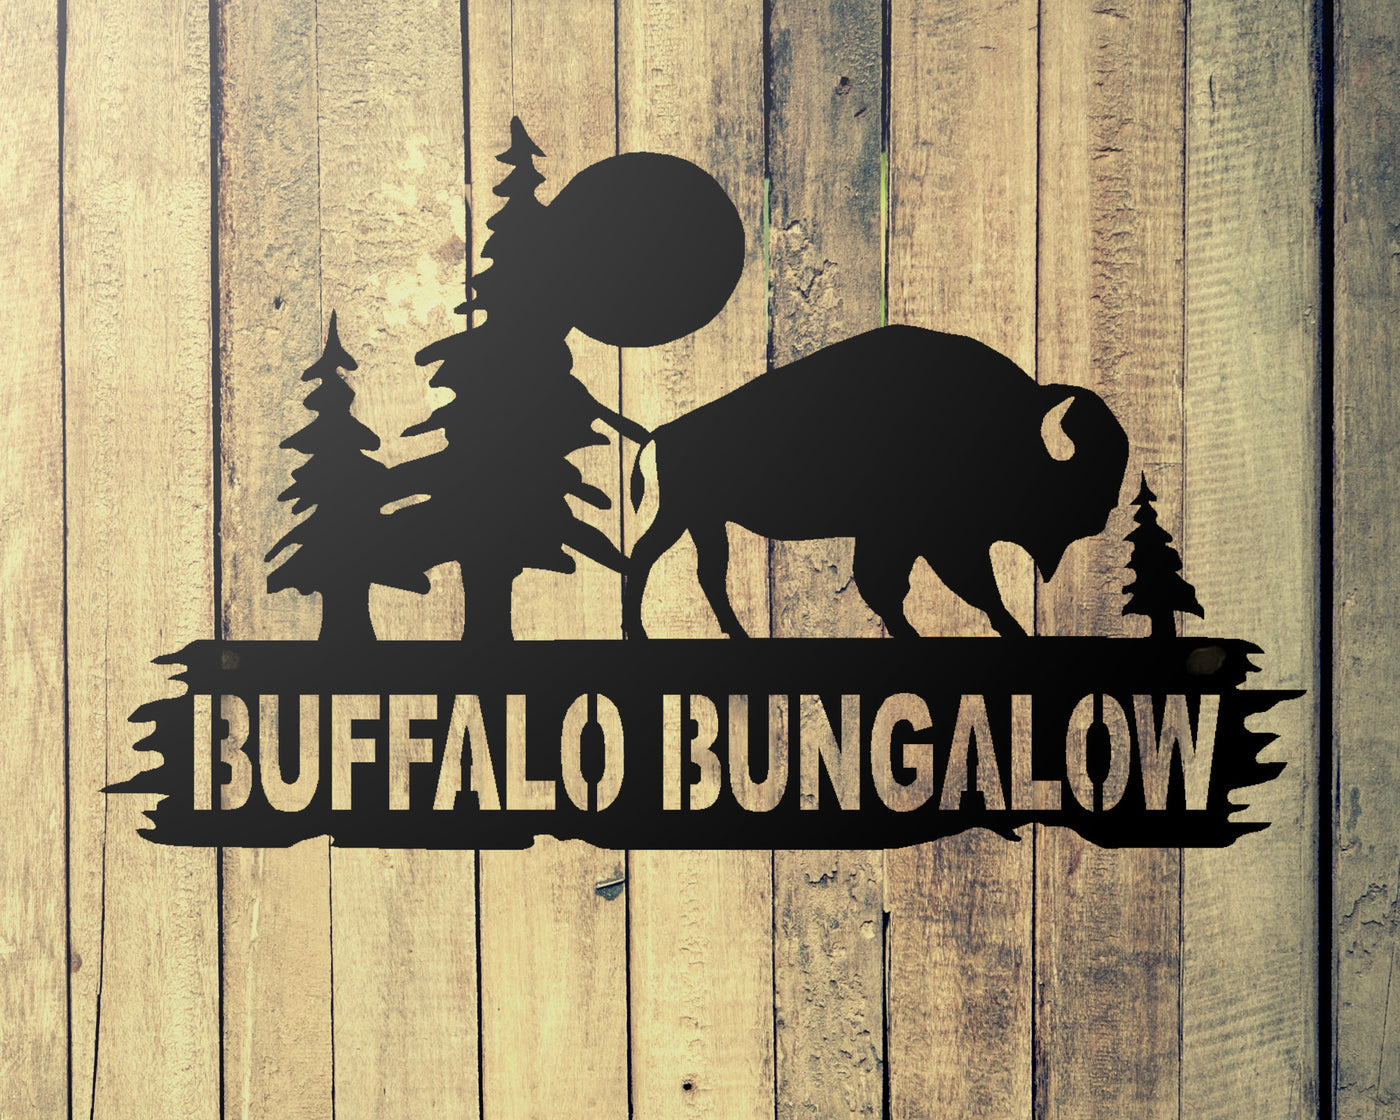 Personalized Buffalo Metal Sign - Madison Iron and Wood - Personalized sign - metal outdoor decor - Steel deocrations - american made products - veteran owned business products - fencing decorations - fencing supplies - custom wall decorations - personalized wall signs - steel - decorative post caps - steel post caps - metal post caps - brackets - structural brackets - home improvement - easter - easter decorations - easter gift - easter yard decor